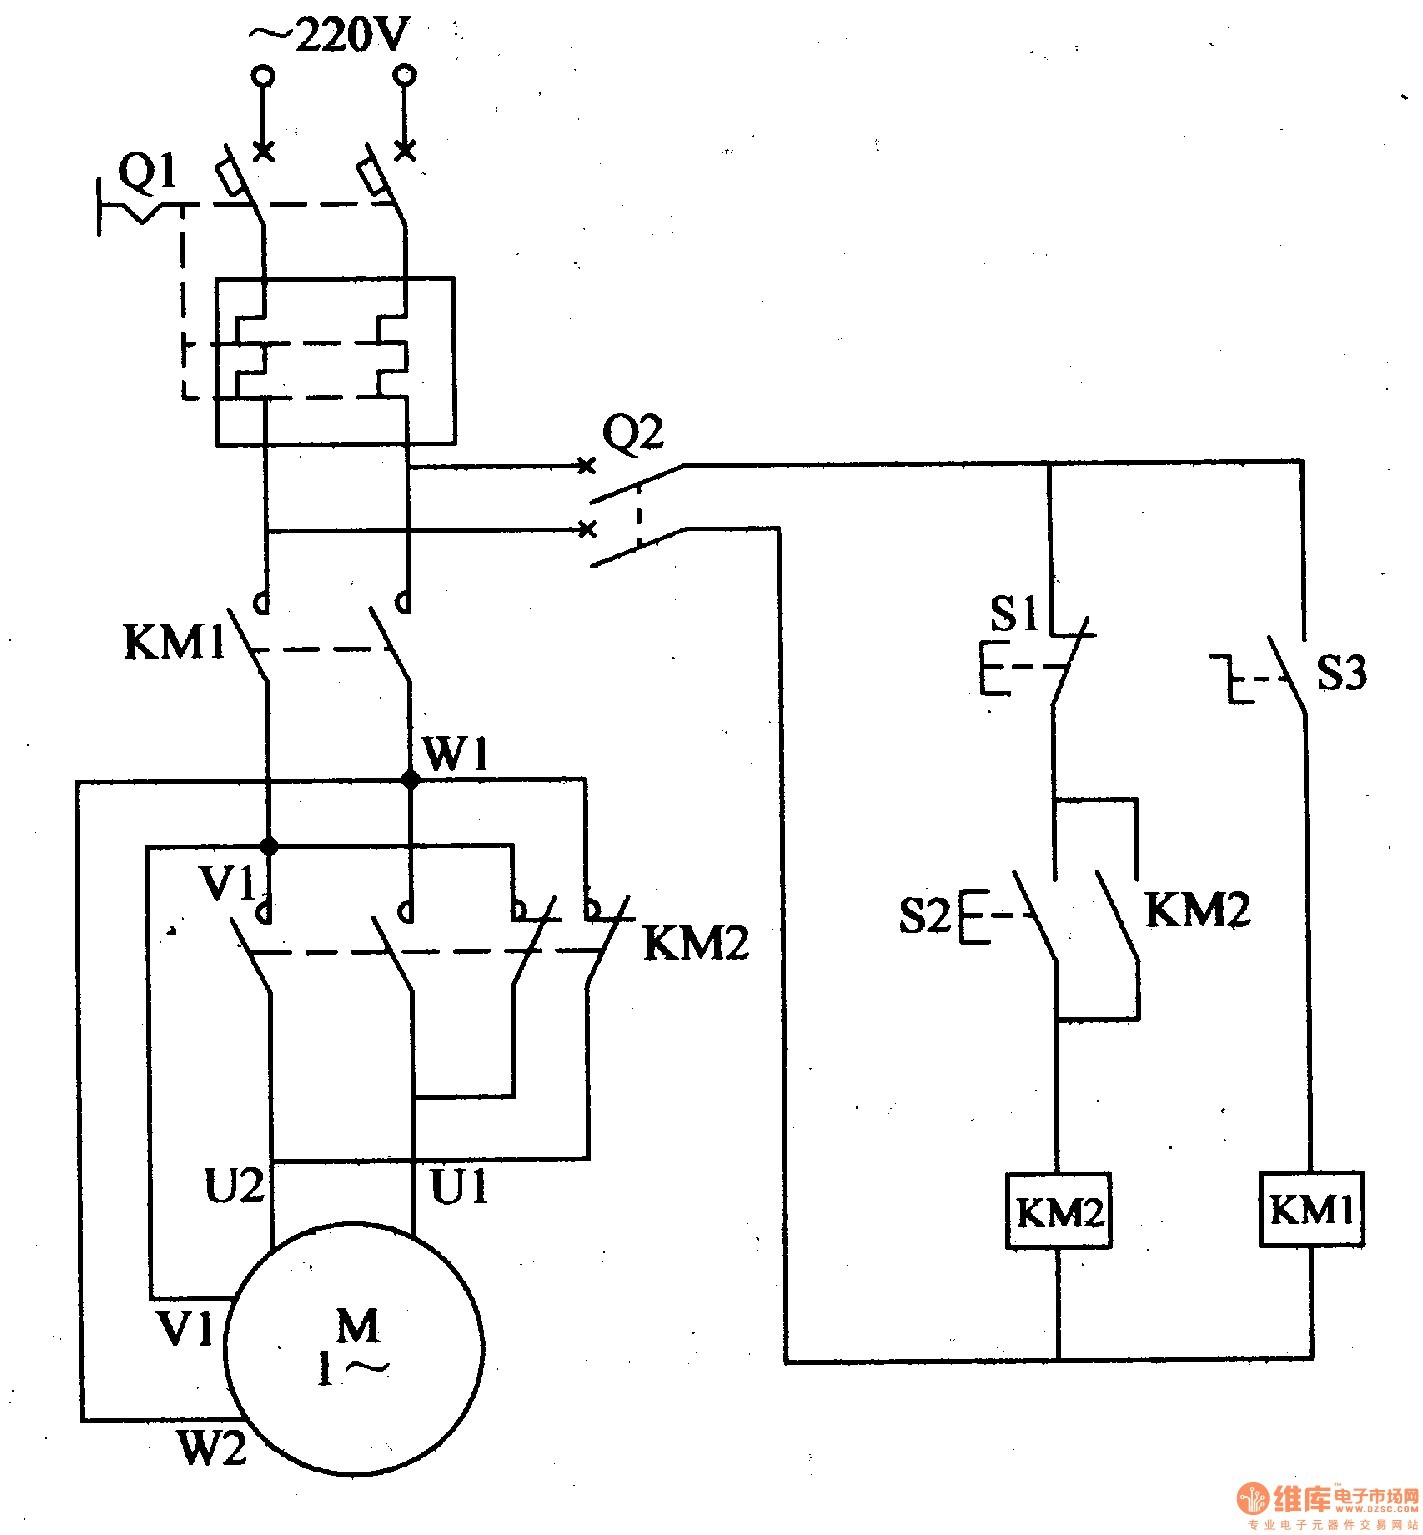 Wiring Diagram Motor Control System New Wiring Diagram 3 Phase Motor Manual Wiring solutions